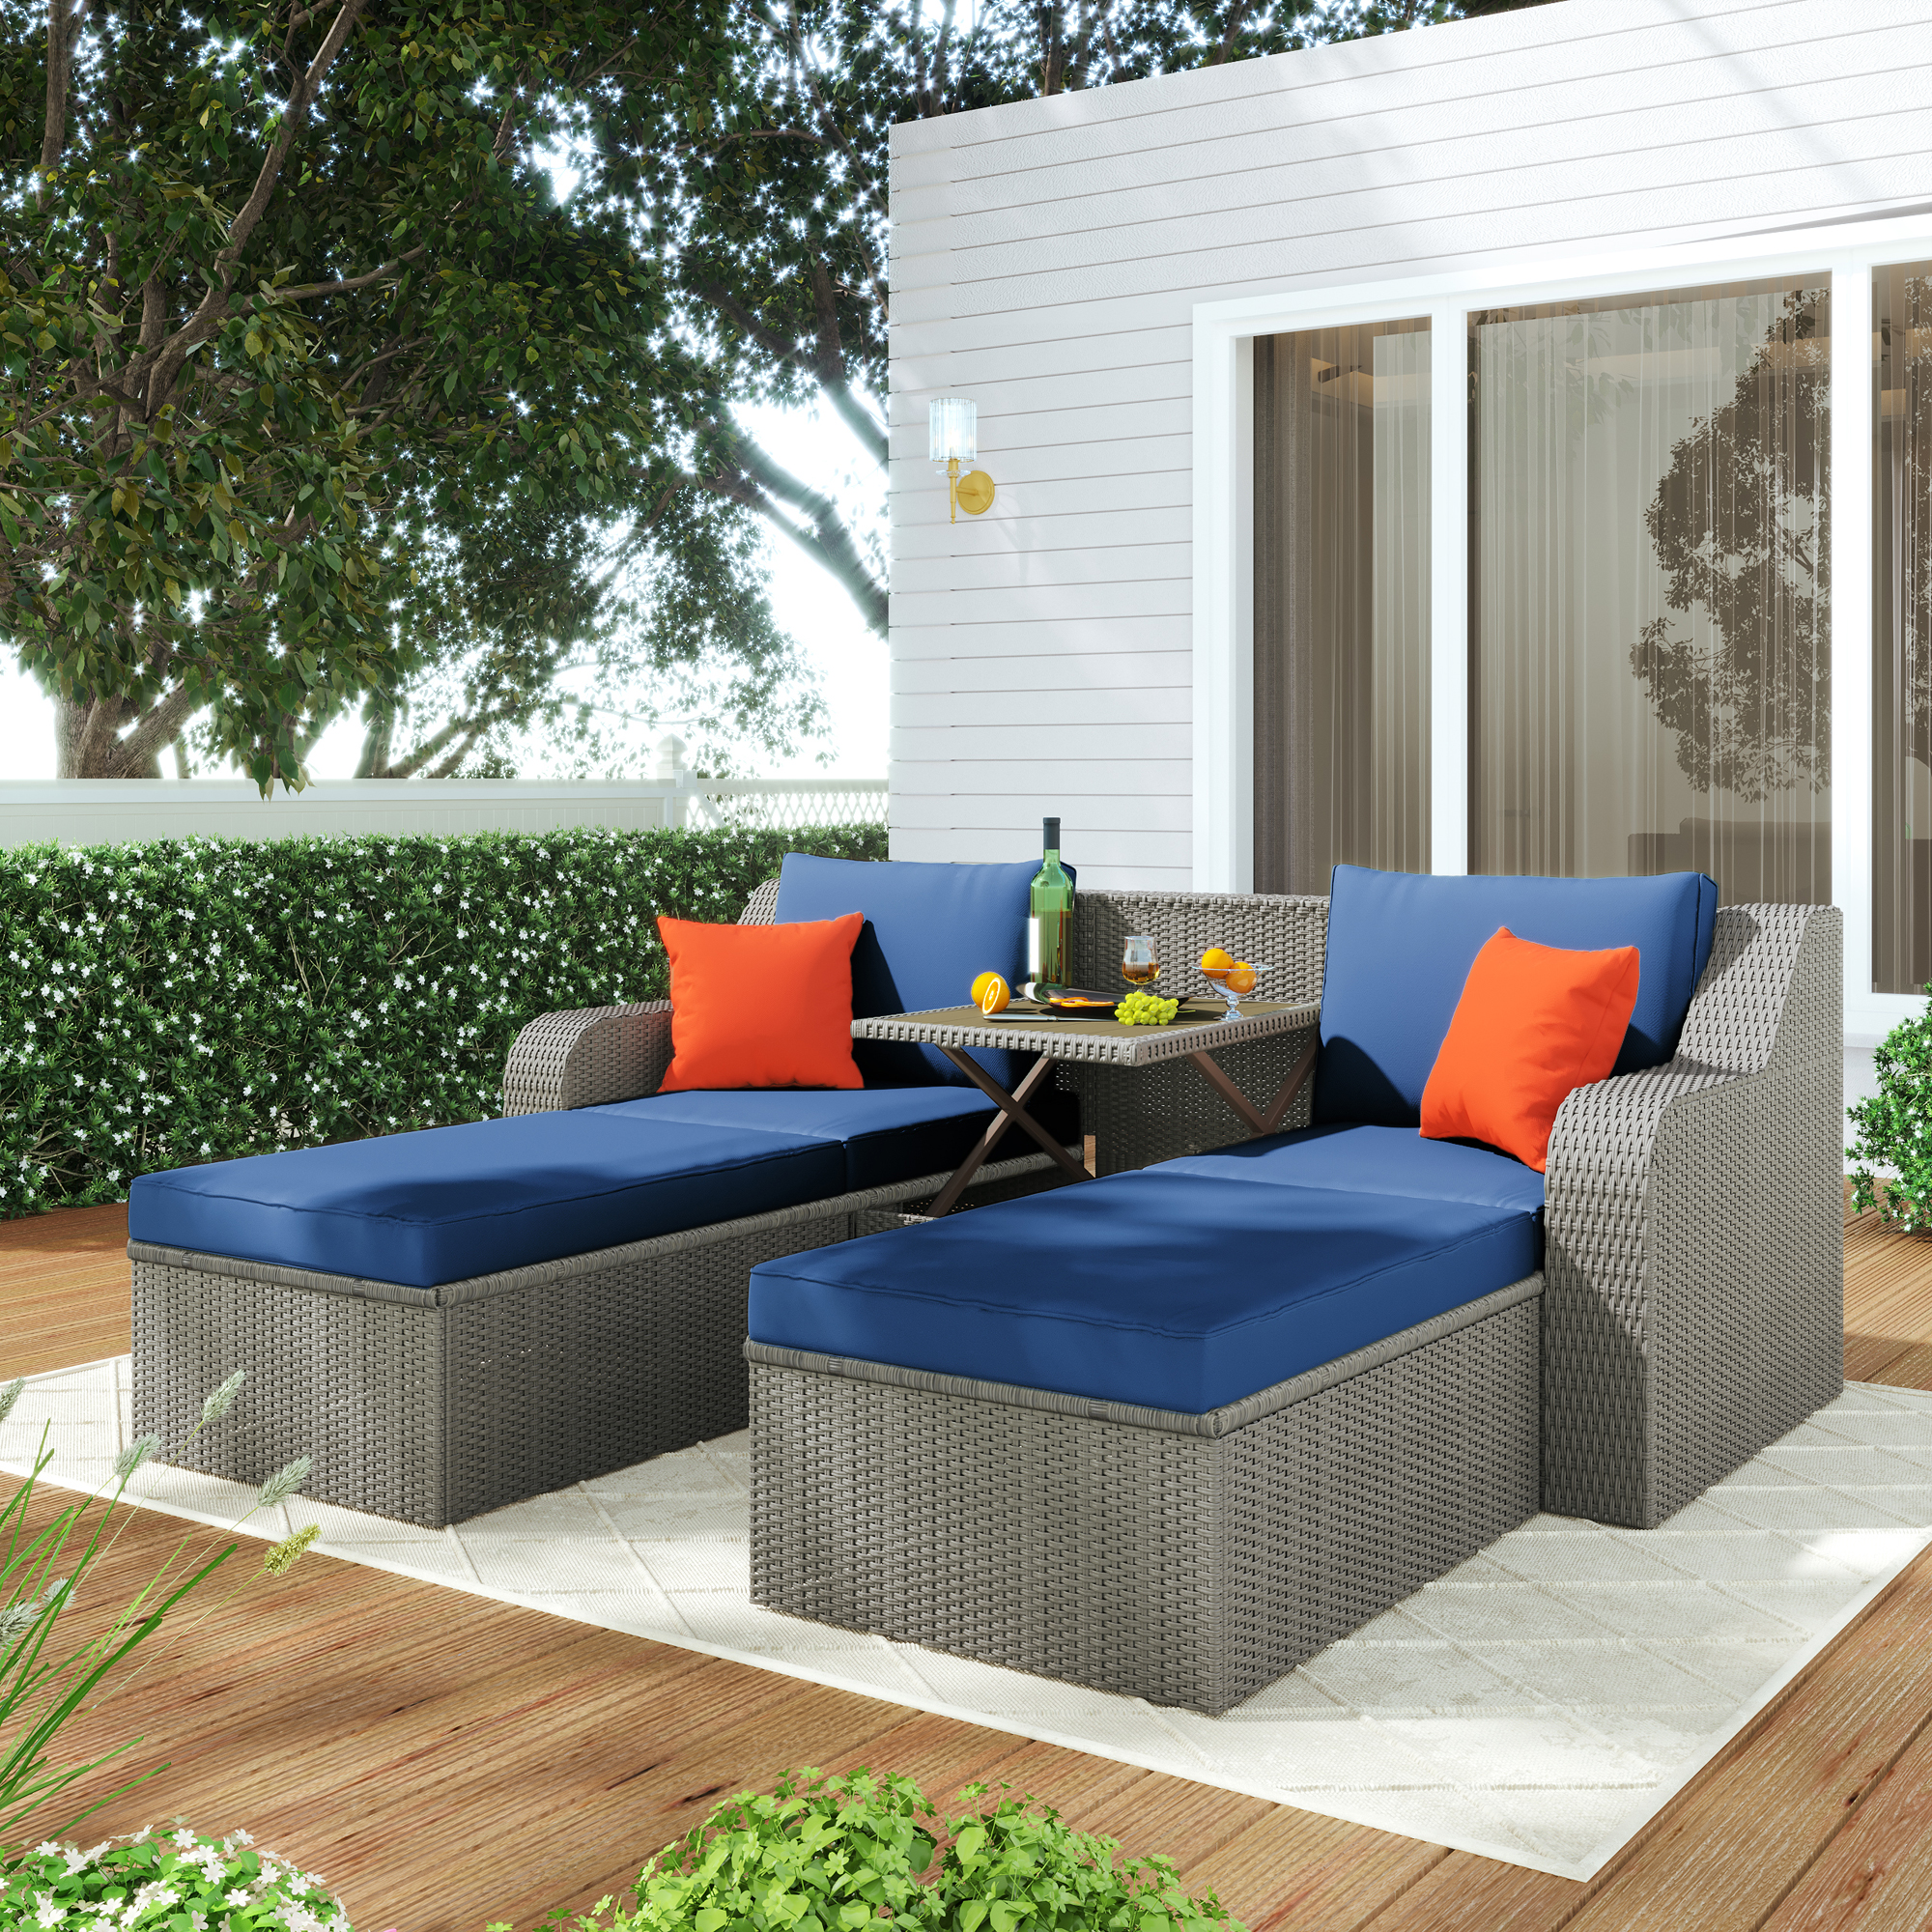 Gray Wicker Patio Seating Sets, SESSLIFE 3-Piece Outdoor Sectional Sofa Set with Loveseat and Soft Cushions, All-Weather Outdoor Table and Chairs Set - image 2 of 9